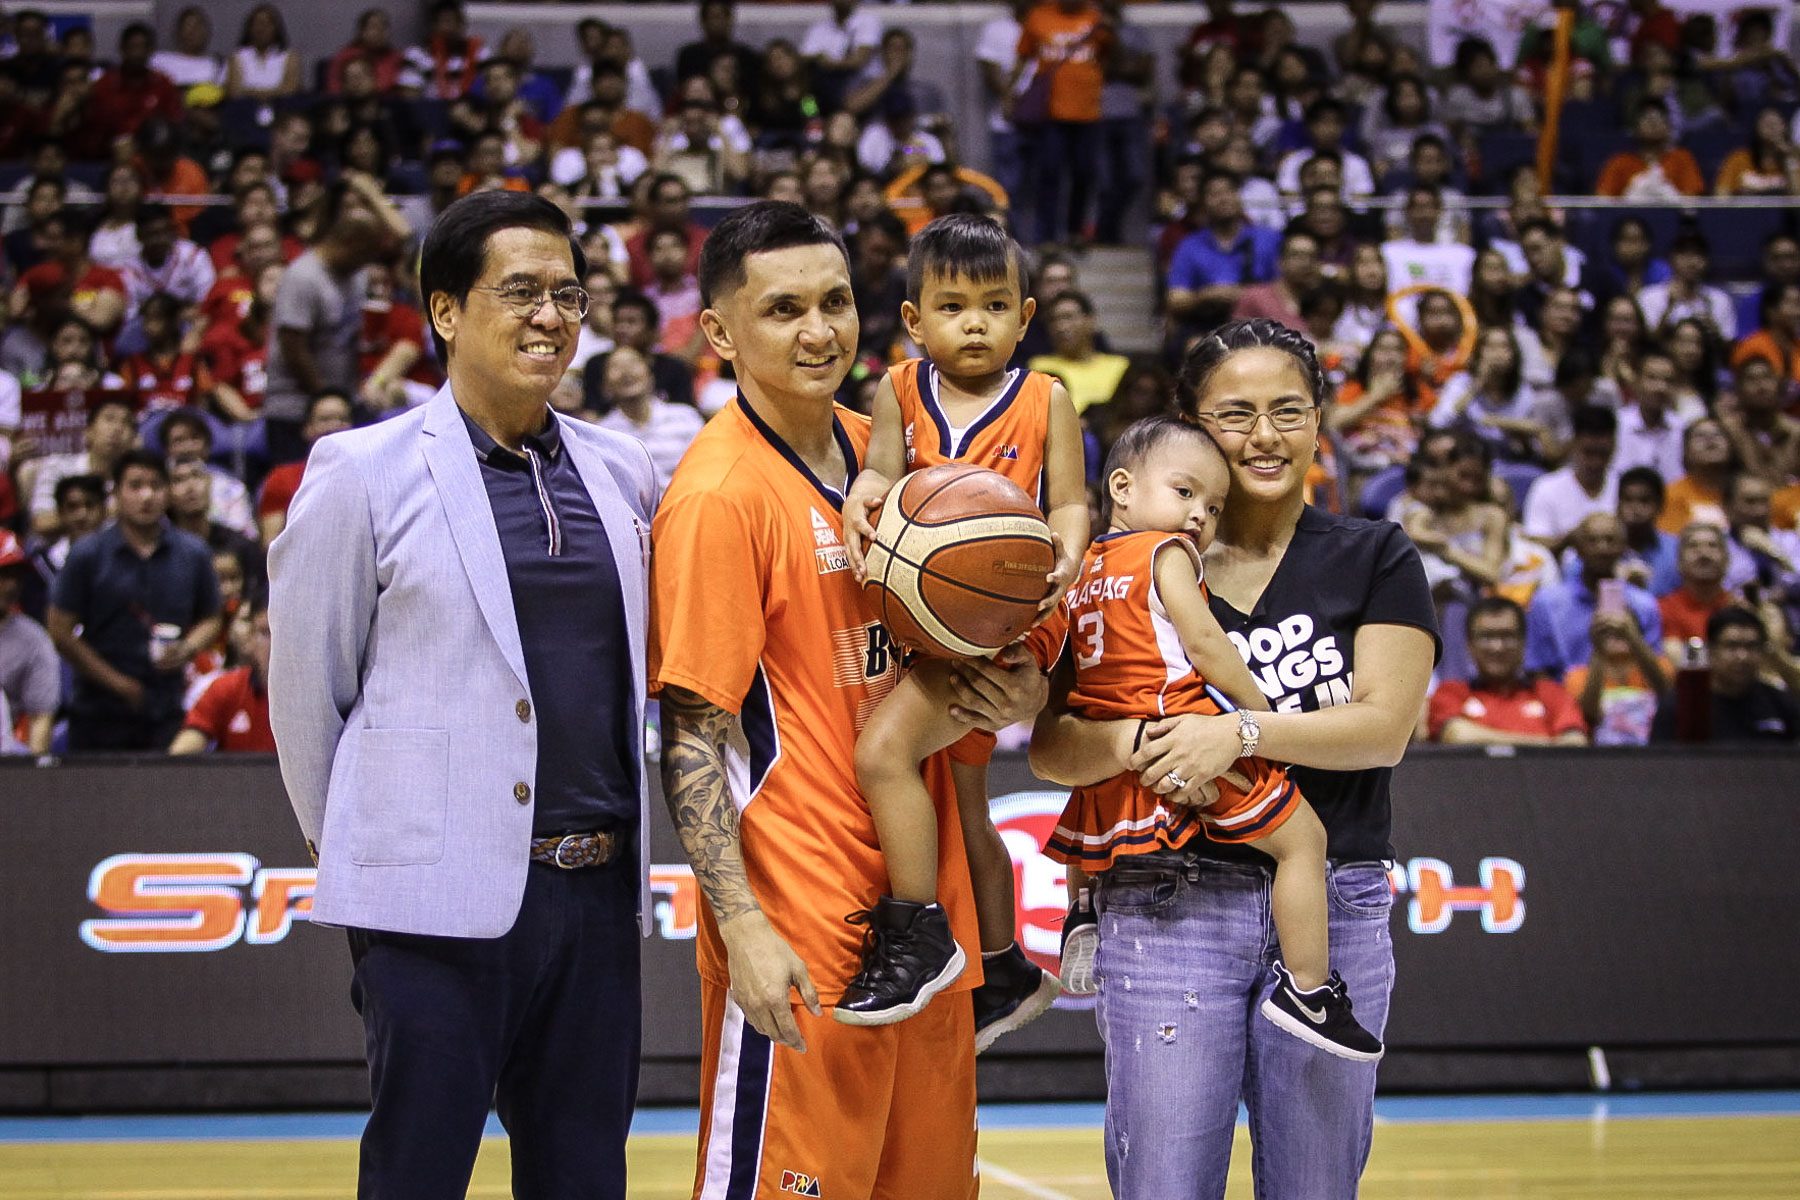 ALL-TIME 3-POINT RECORD. Jimmy Alapag, playing for Meralco, is honored with his family at halftime of Game 2 of the 2016 Governors' Cup Finals in October 2016, after he made his 1,243rd career 3-pointer and surpassed Allan Caidic for a new new all-time PBA record for most triples. File Photo by Josh Albelda/Rappler  